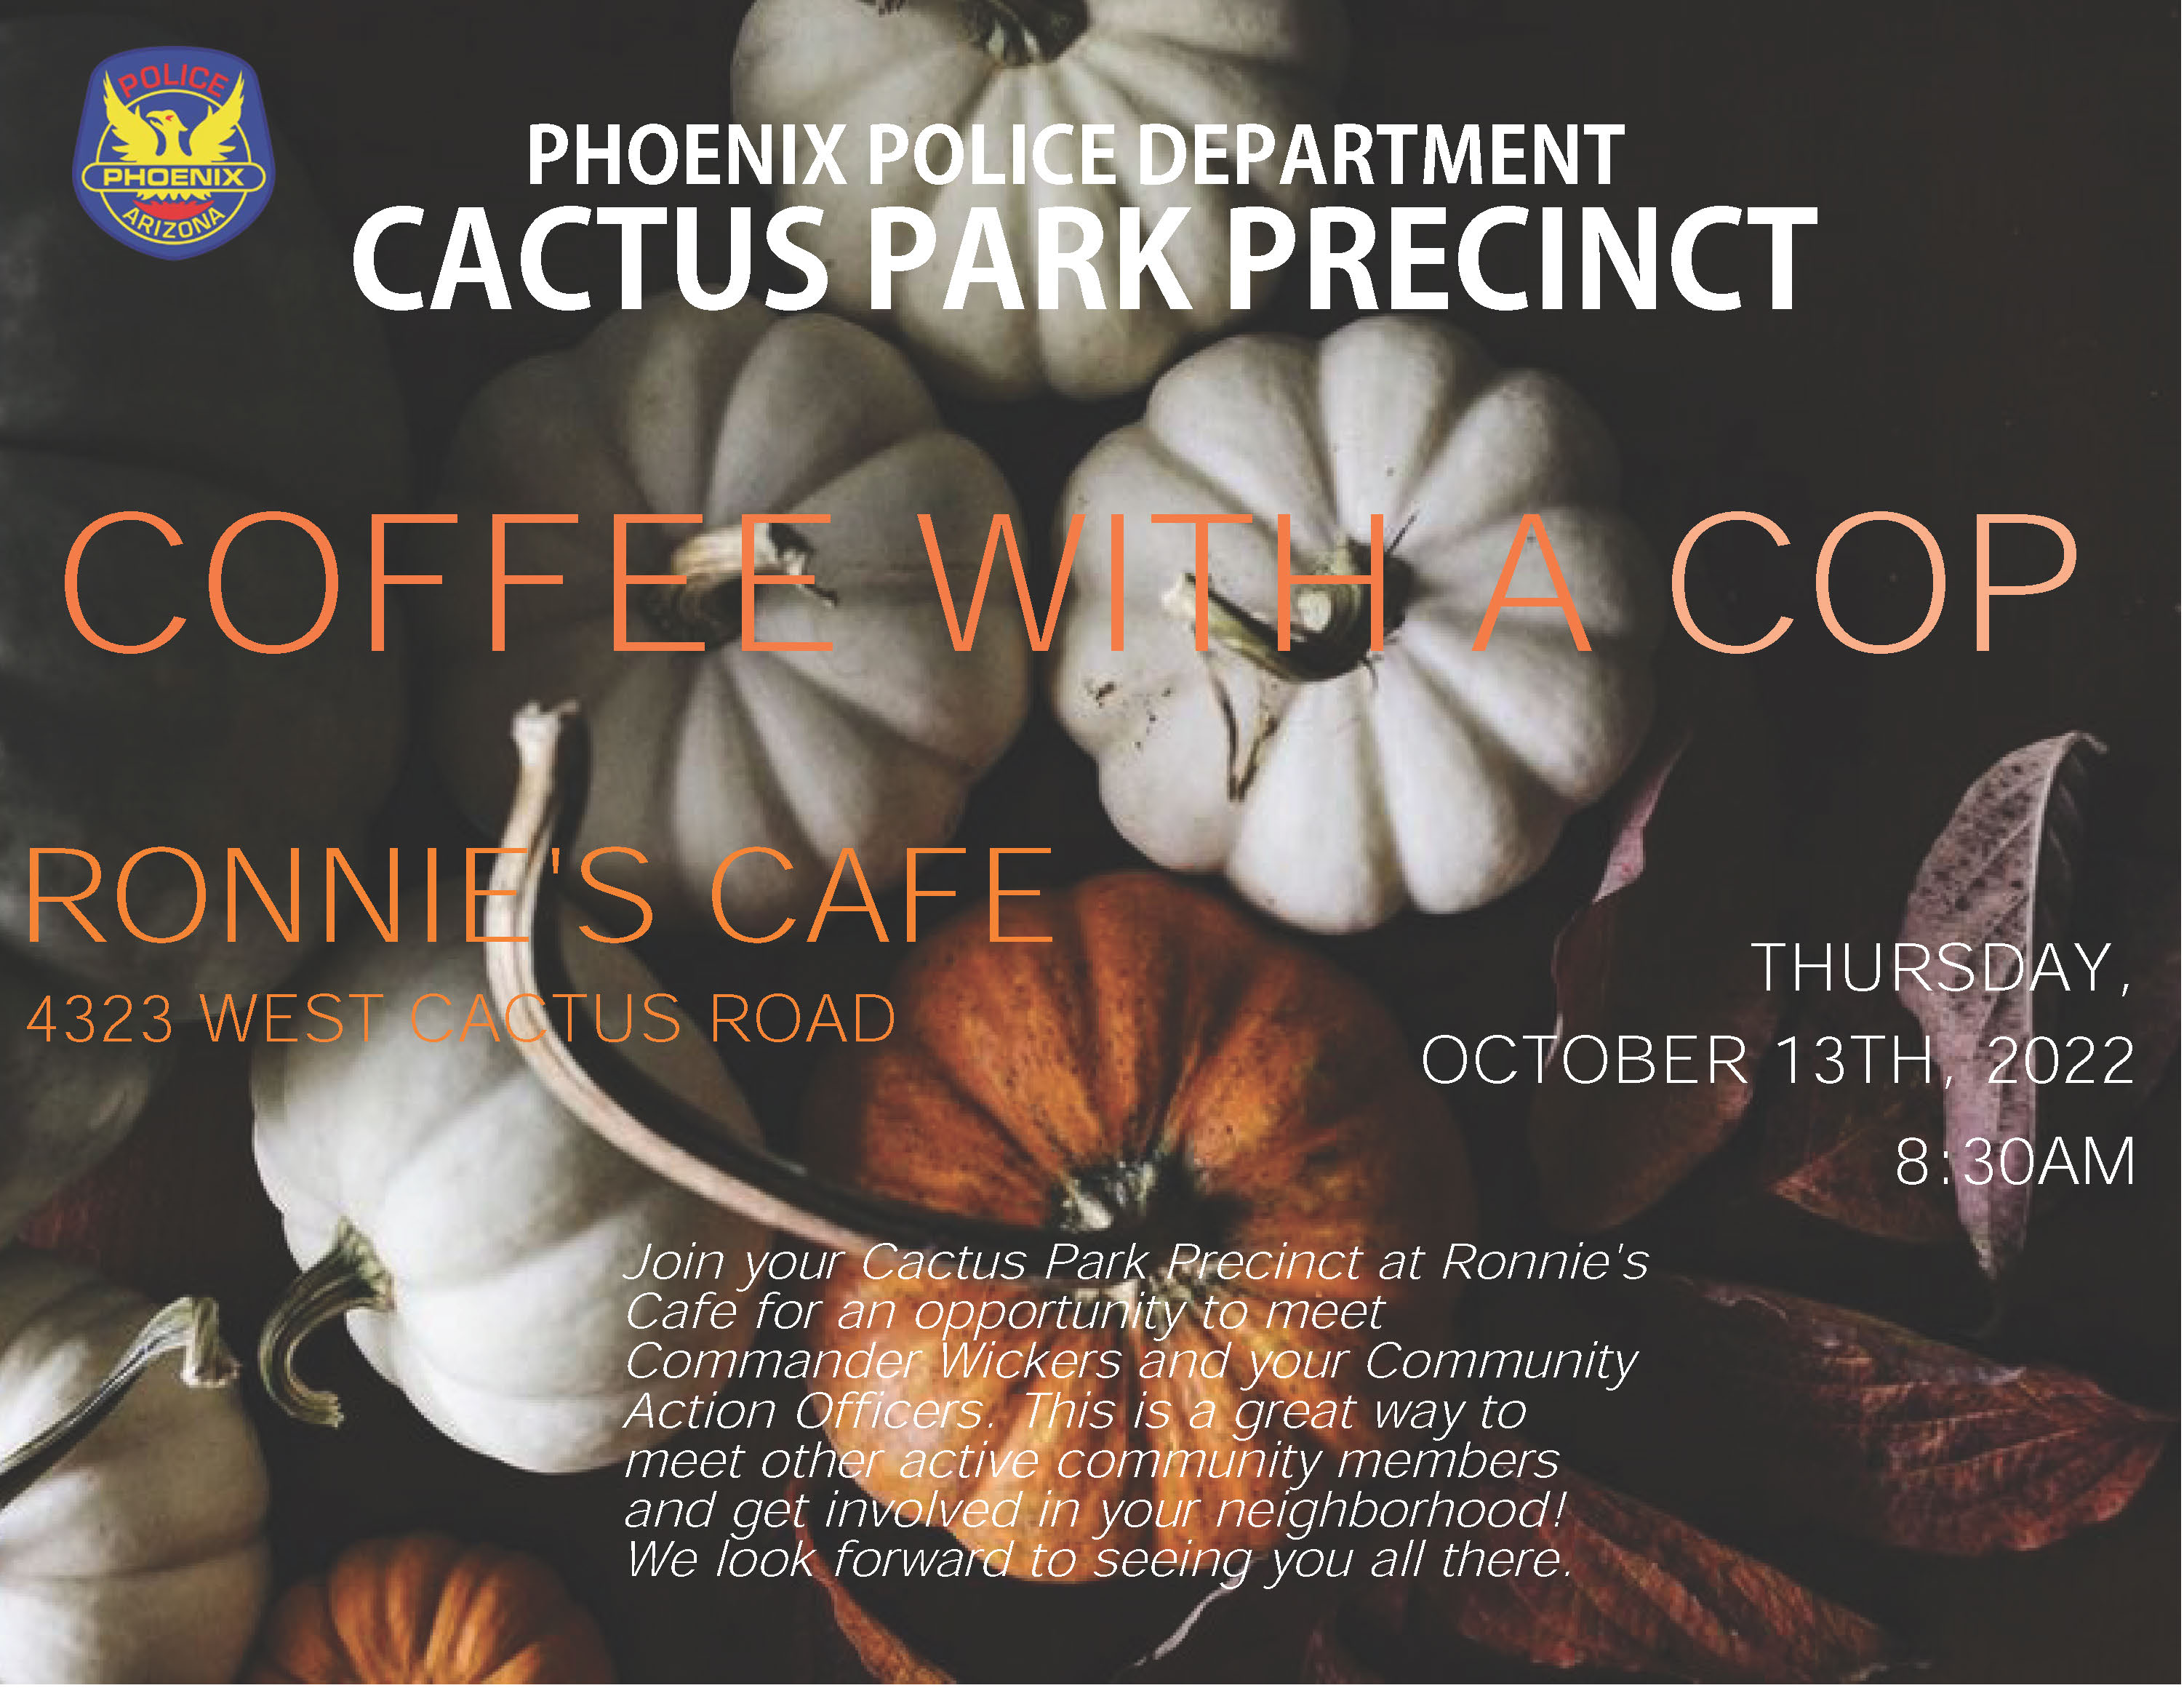 coffee with a cop flyer october 2022.jpg